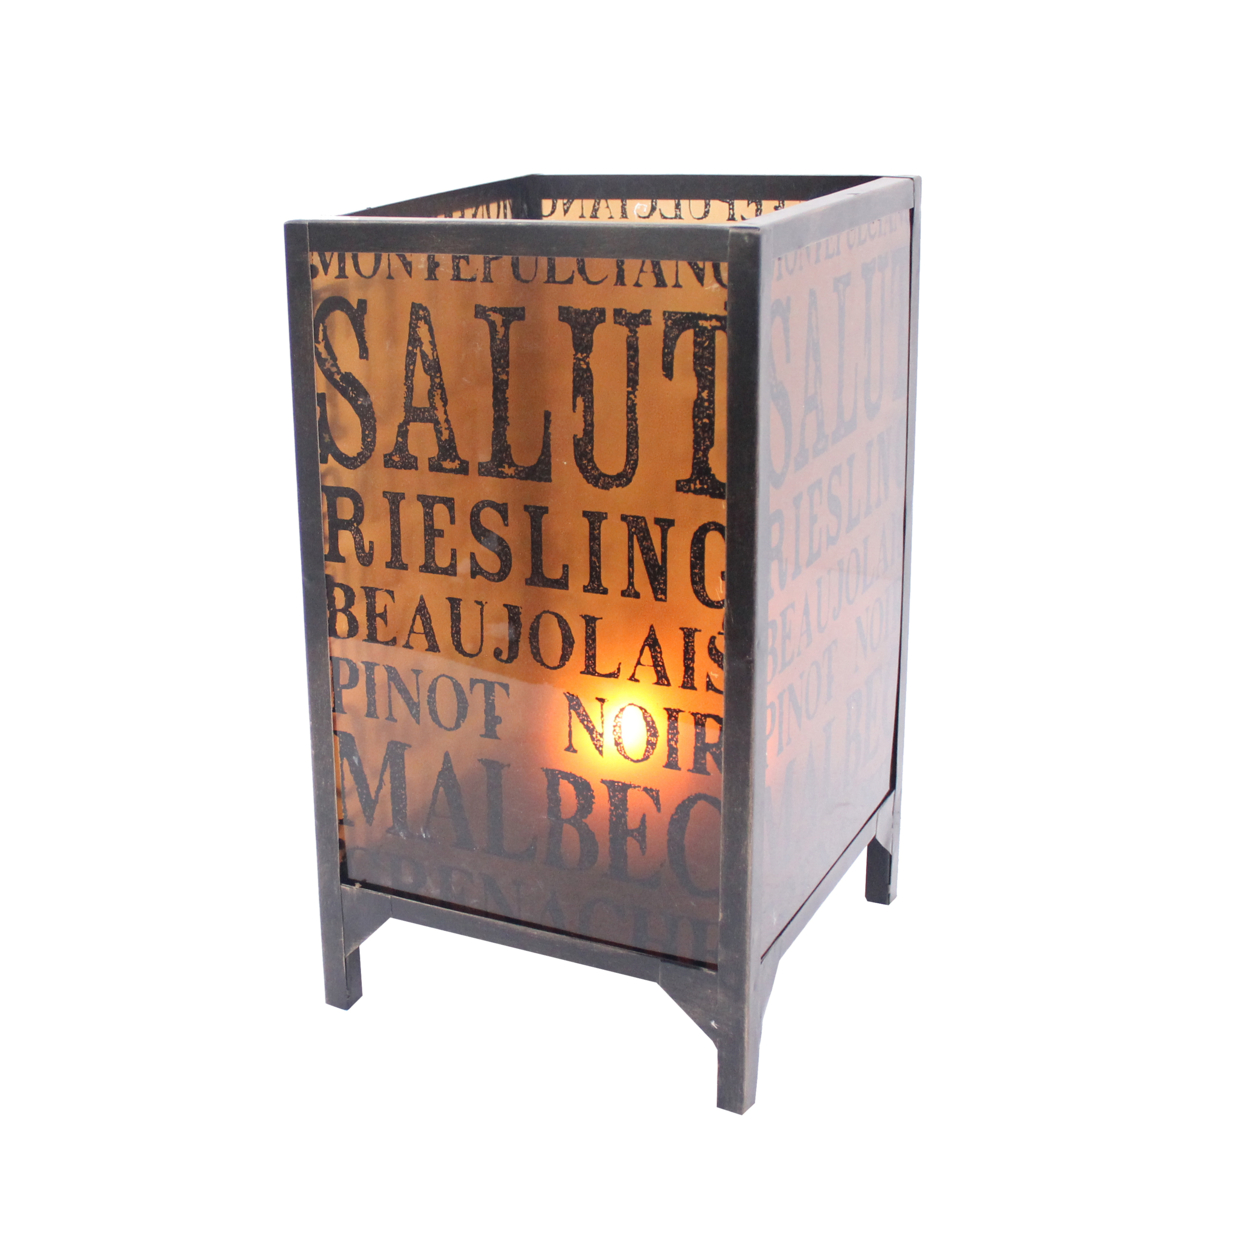 Cuboidal Metal And Glass Candleholder With Typography, Black And Clear- Saltoro Sherpi